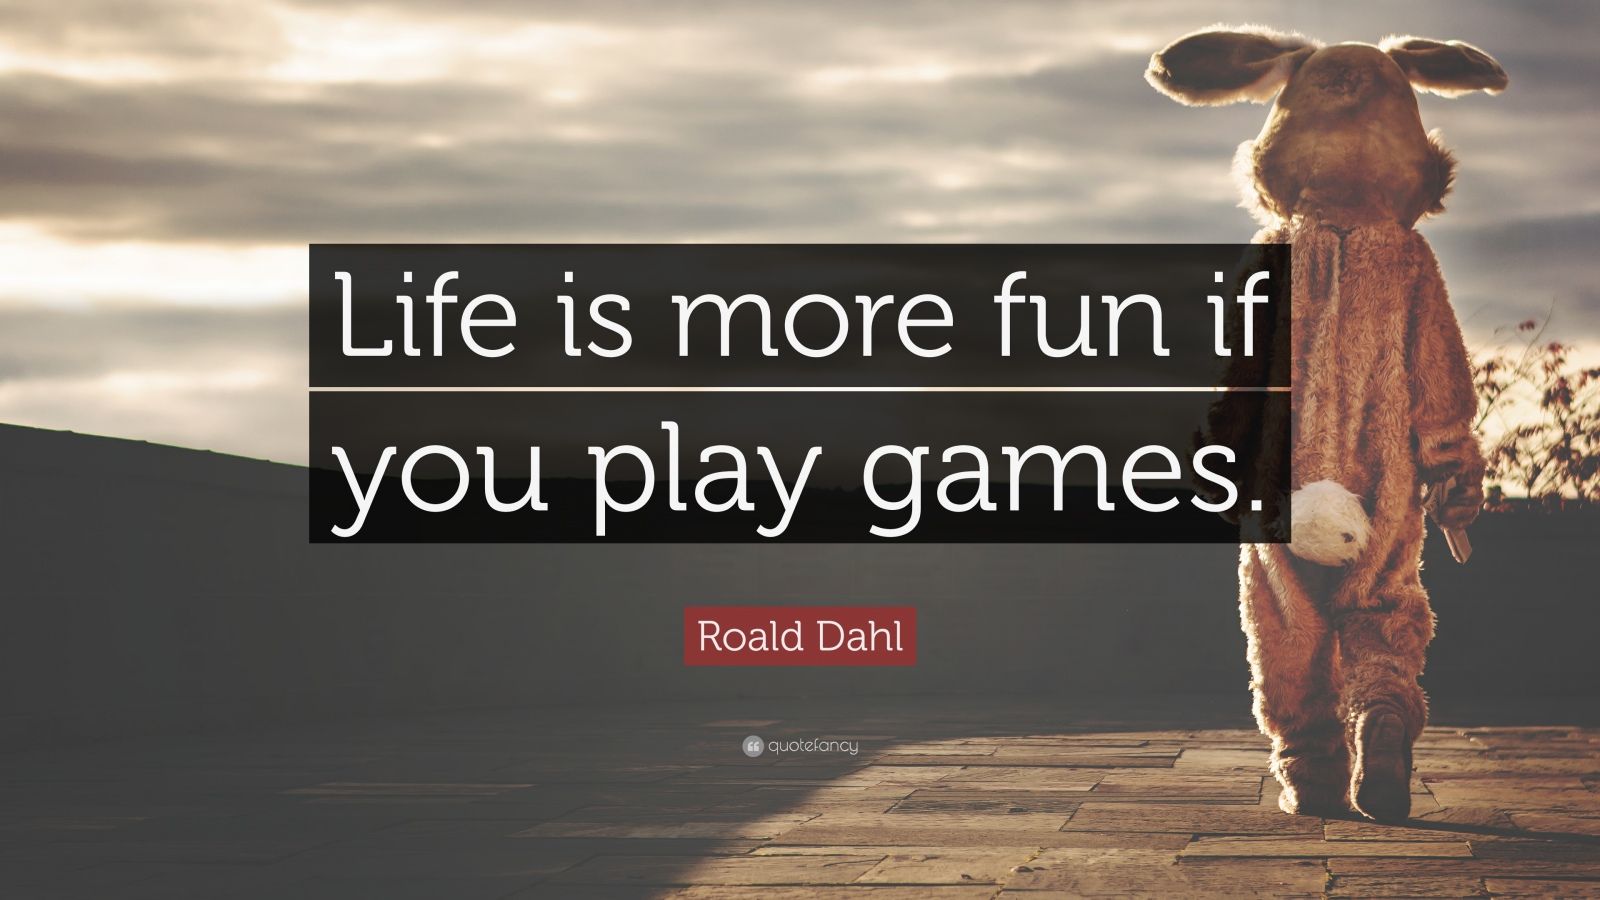 Roald Dahl Quote: “Life is more fun if you play games.” (17 wallpapers